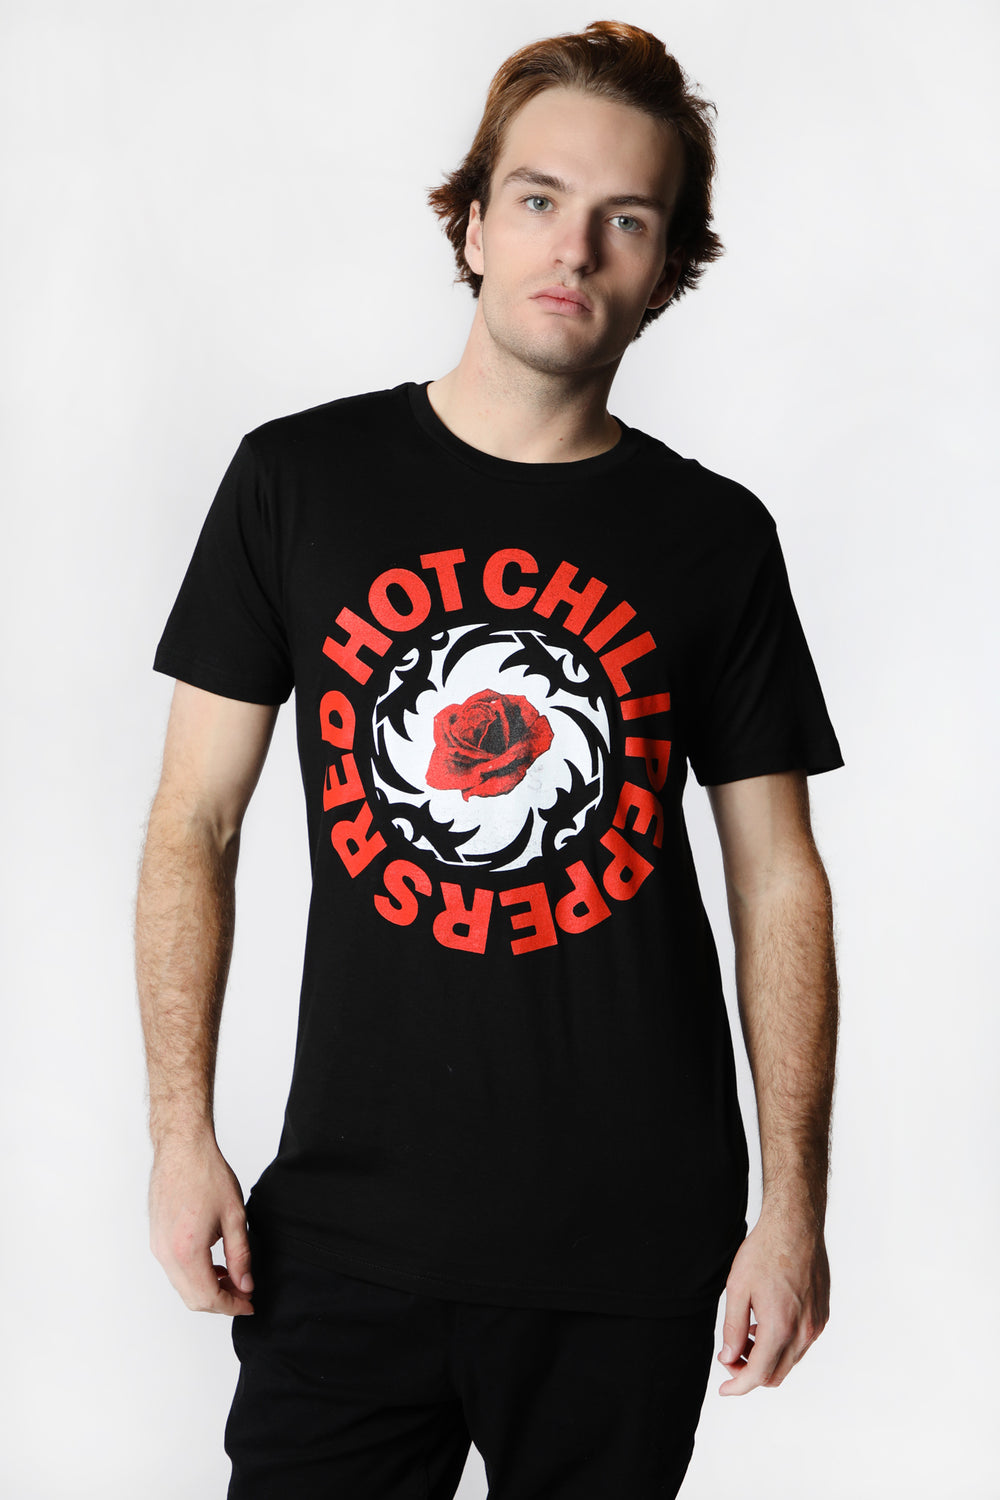 T-Shirt Imprimé Red Hot Chili Peppers Homme T-Shirt Imprimé Red Hot Chili Peppers Homme